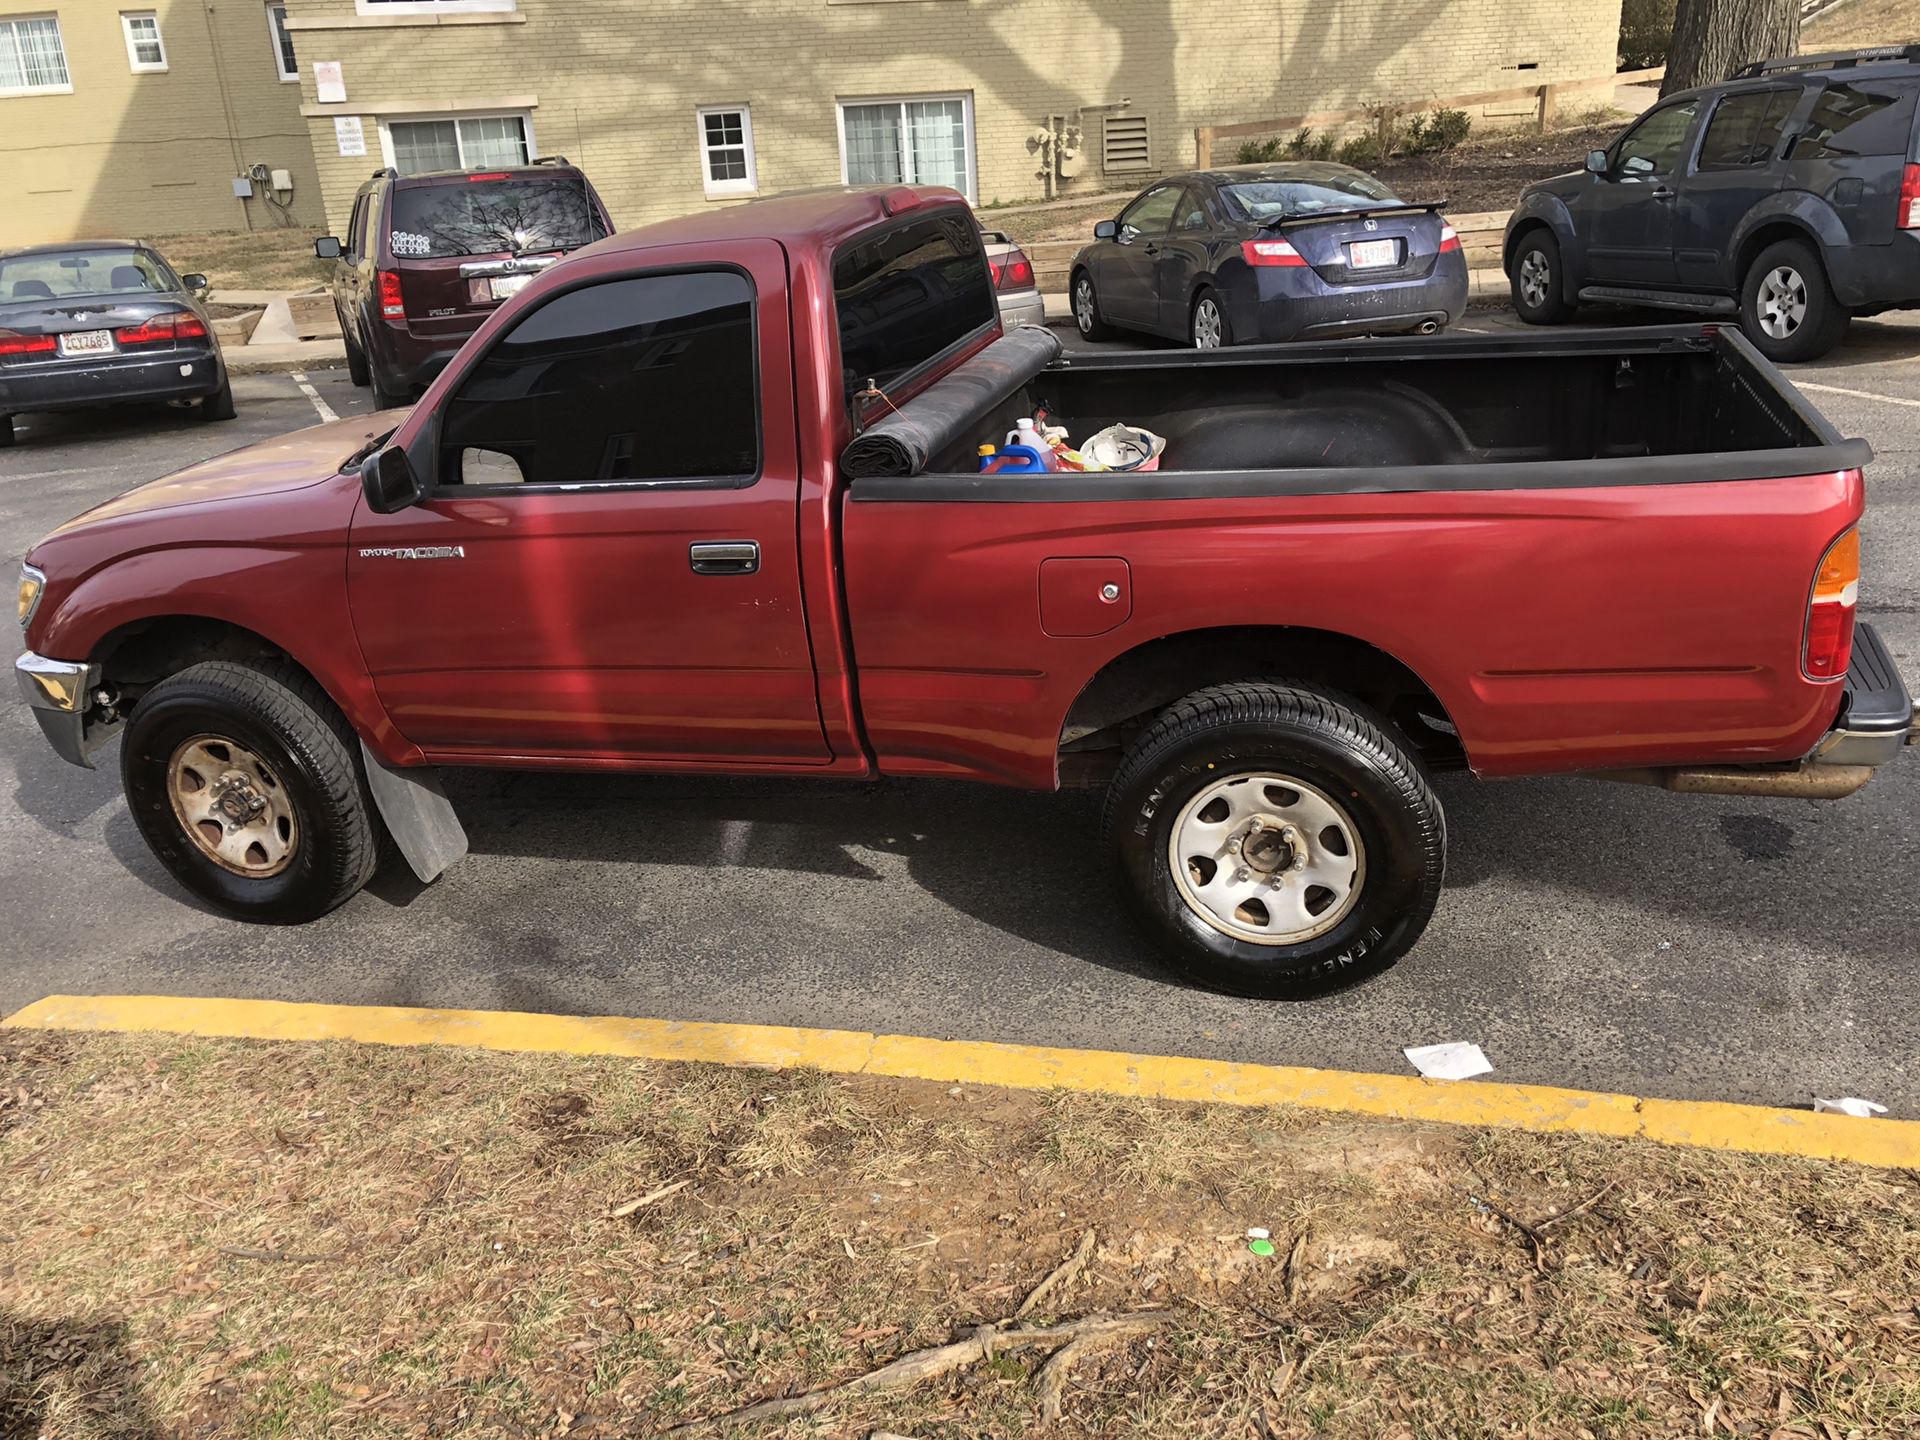 good truck toyota tacoma year 95 4x4 4 cylinders in good condition